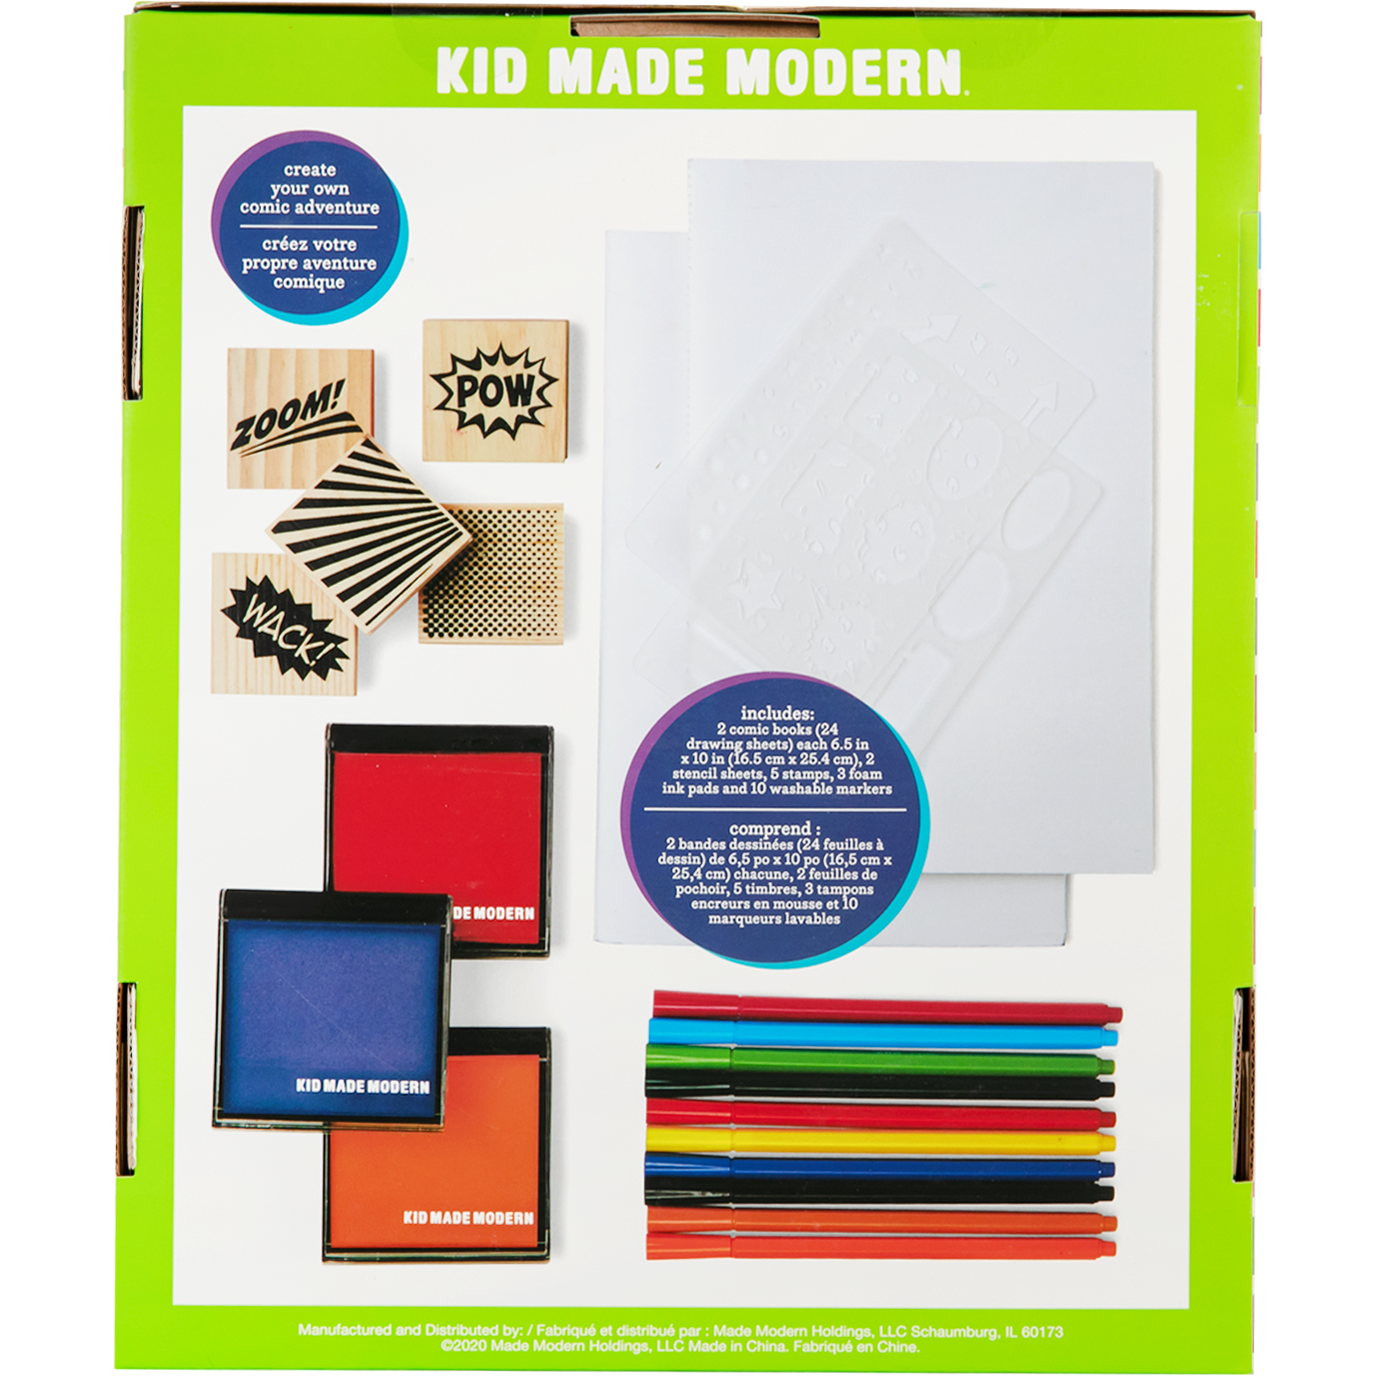  Kid Made Modern Craft Set Comic Book Kit - Kids Arts and Crafts  Toys, Storytelling for Kids : Office Products